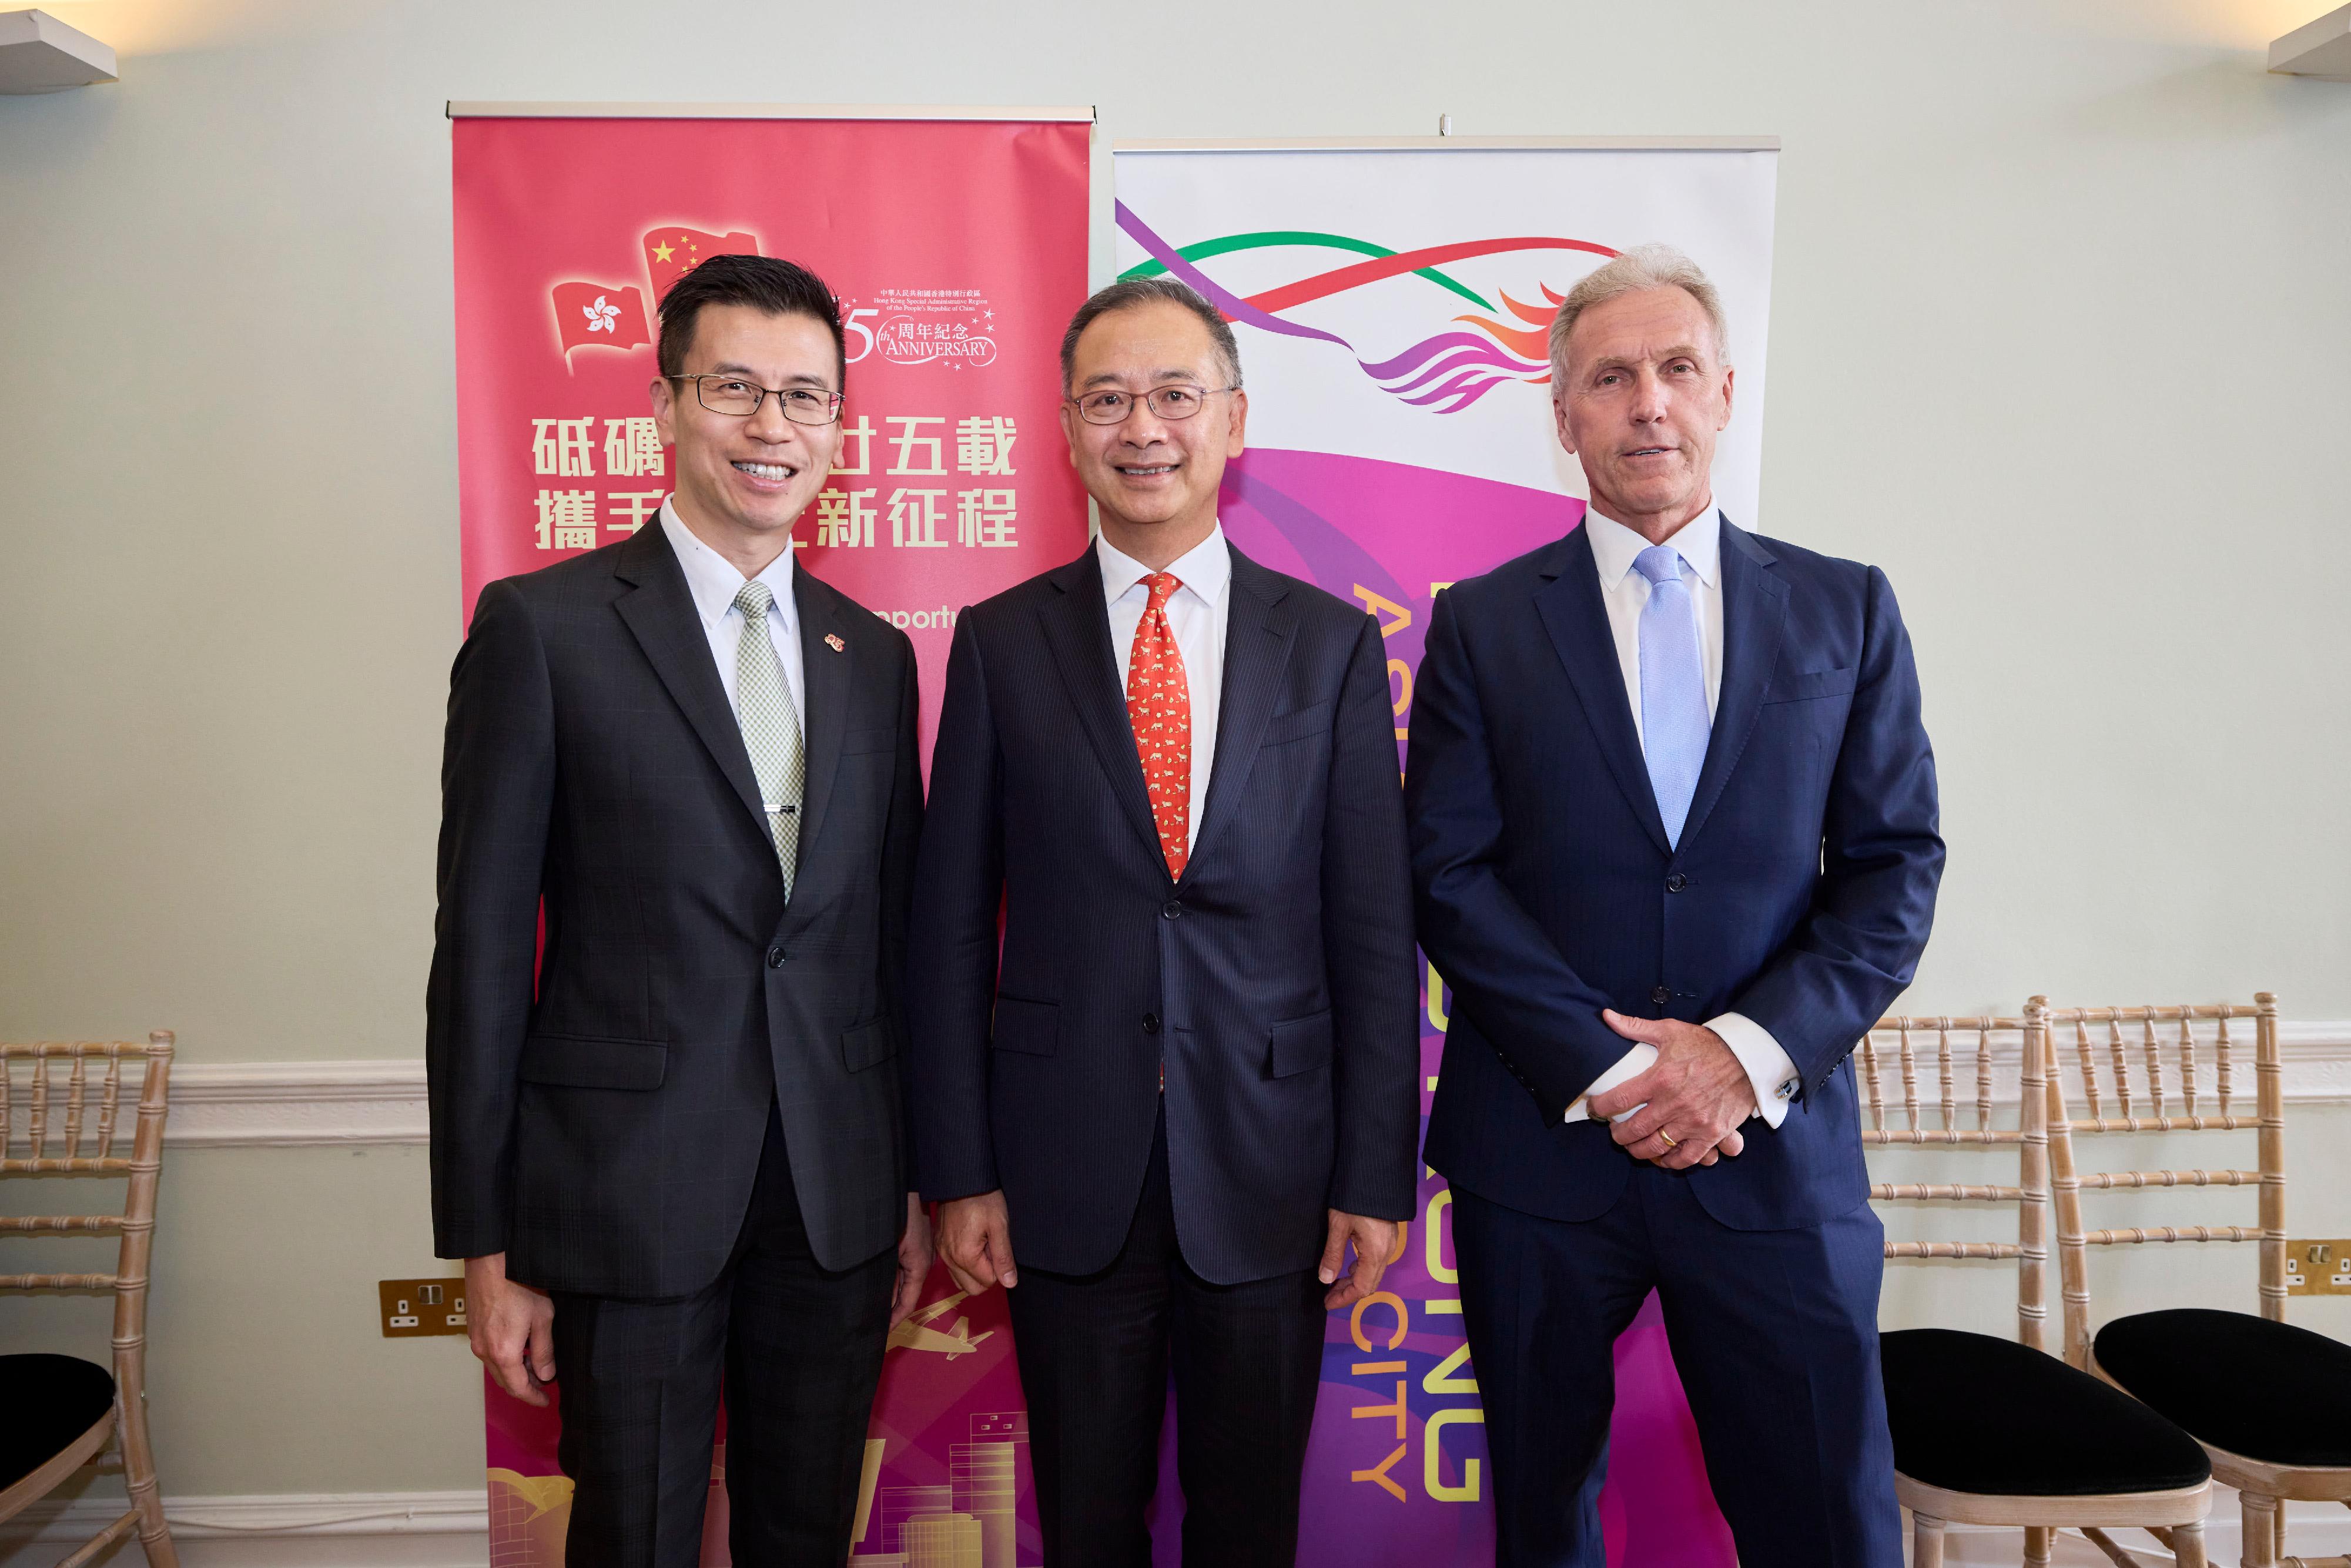 The Hong Kong Economic and Trade Office, London (London ETO), partnered with the Asia House on 12 May (London time) to hold a seminar for leaders in UK’s financial services sector.  Photo shows the Director-General of the London ETO, Mr Gilford Law (left), the Chief Executive of the Hong Kong Monetary Authority, Mr Eddie Yue (centre), and the Chief Executive of the Asia House, Mr Michael Lawrence (right), at the seminar.